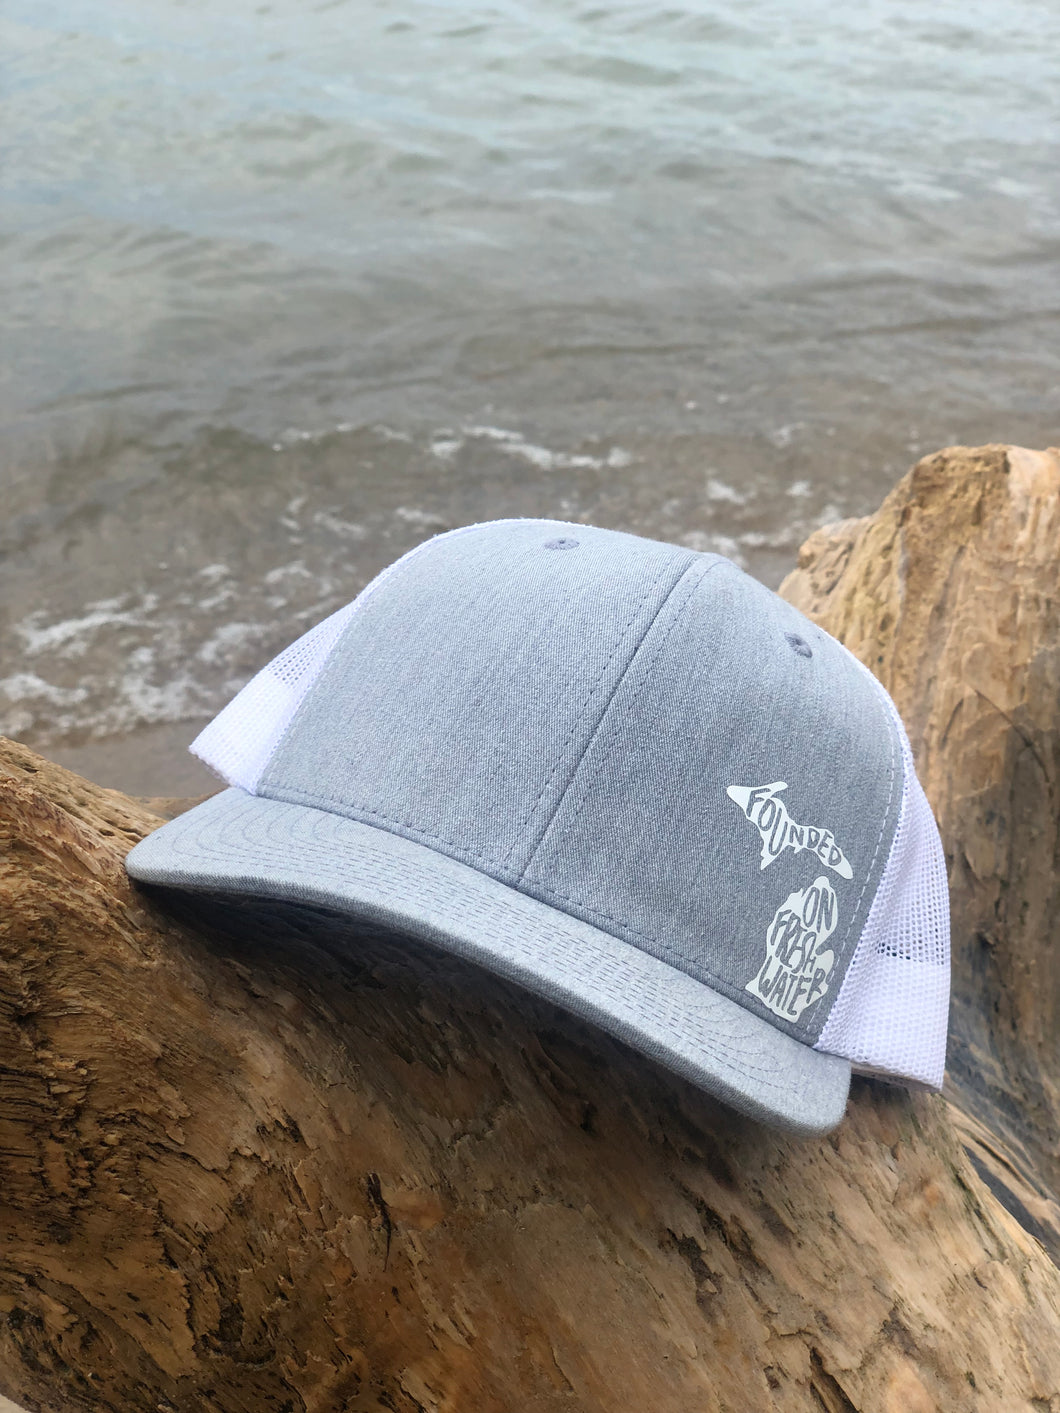 Founded on Freshwater Grey Trucker